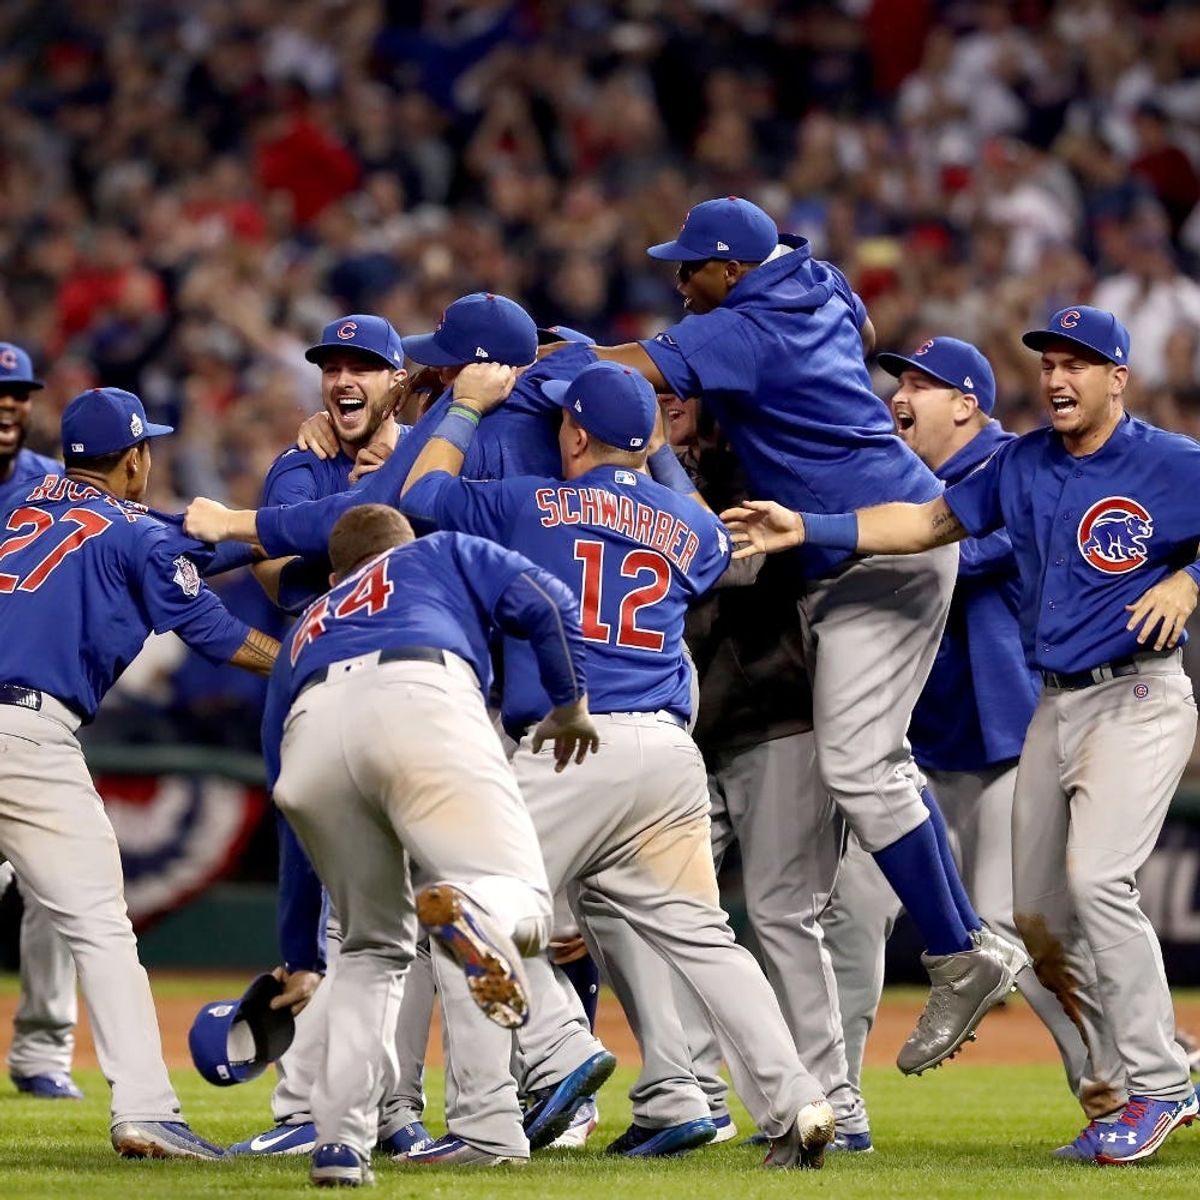 Celebs Are Losing Their Minds Over the Chicago Cubs World Series Win